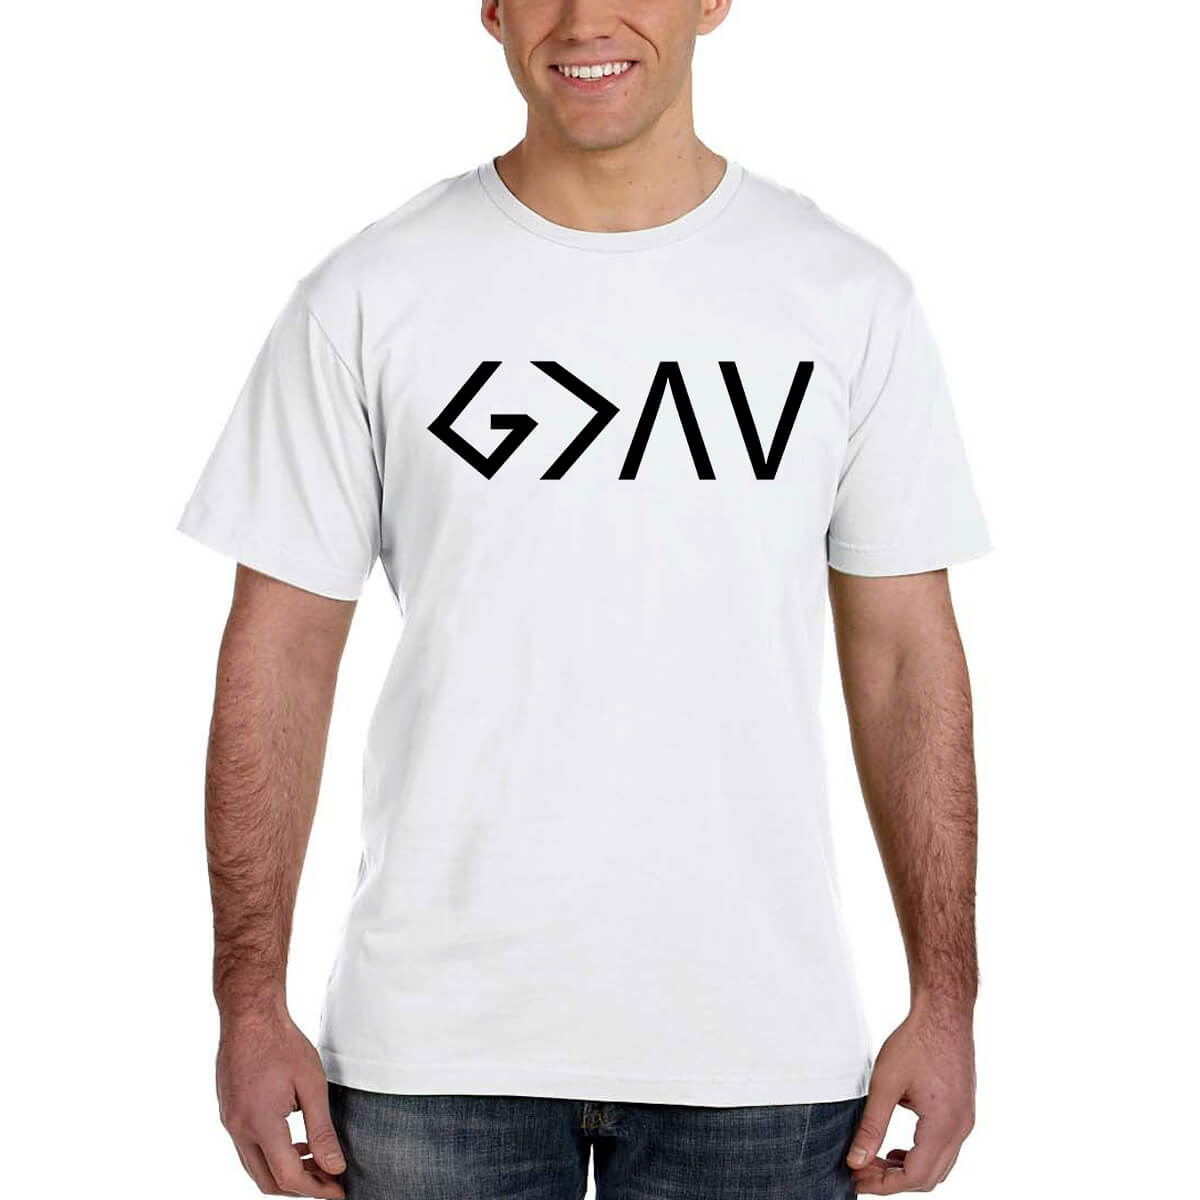 God Is Greater Than The Highs and Lows Men's T-Shirt